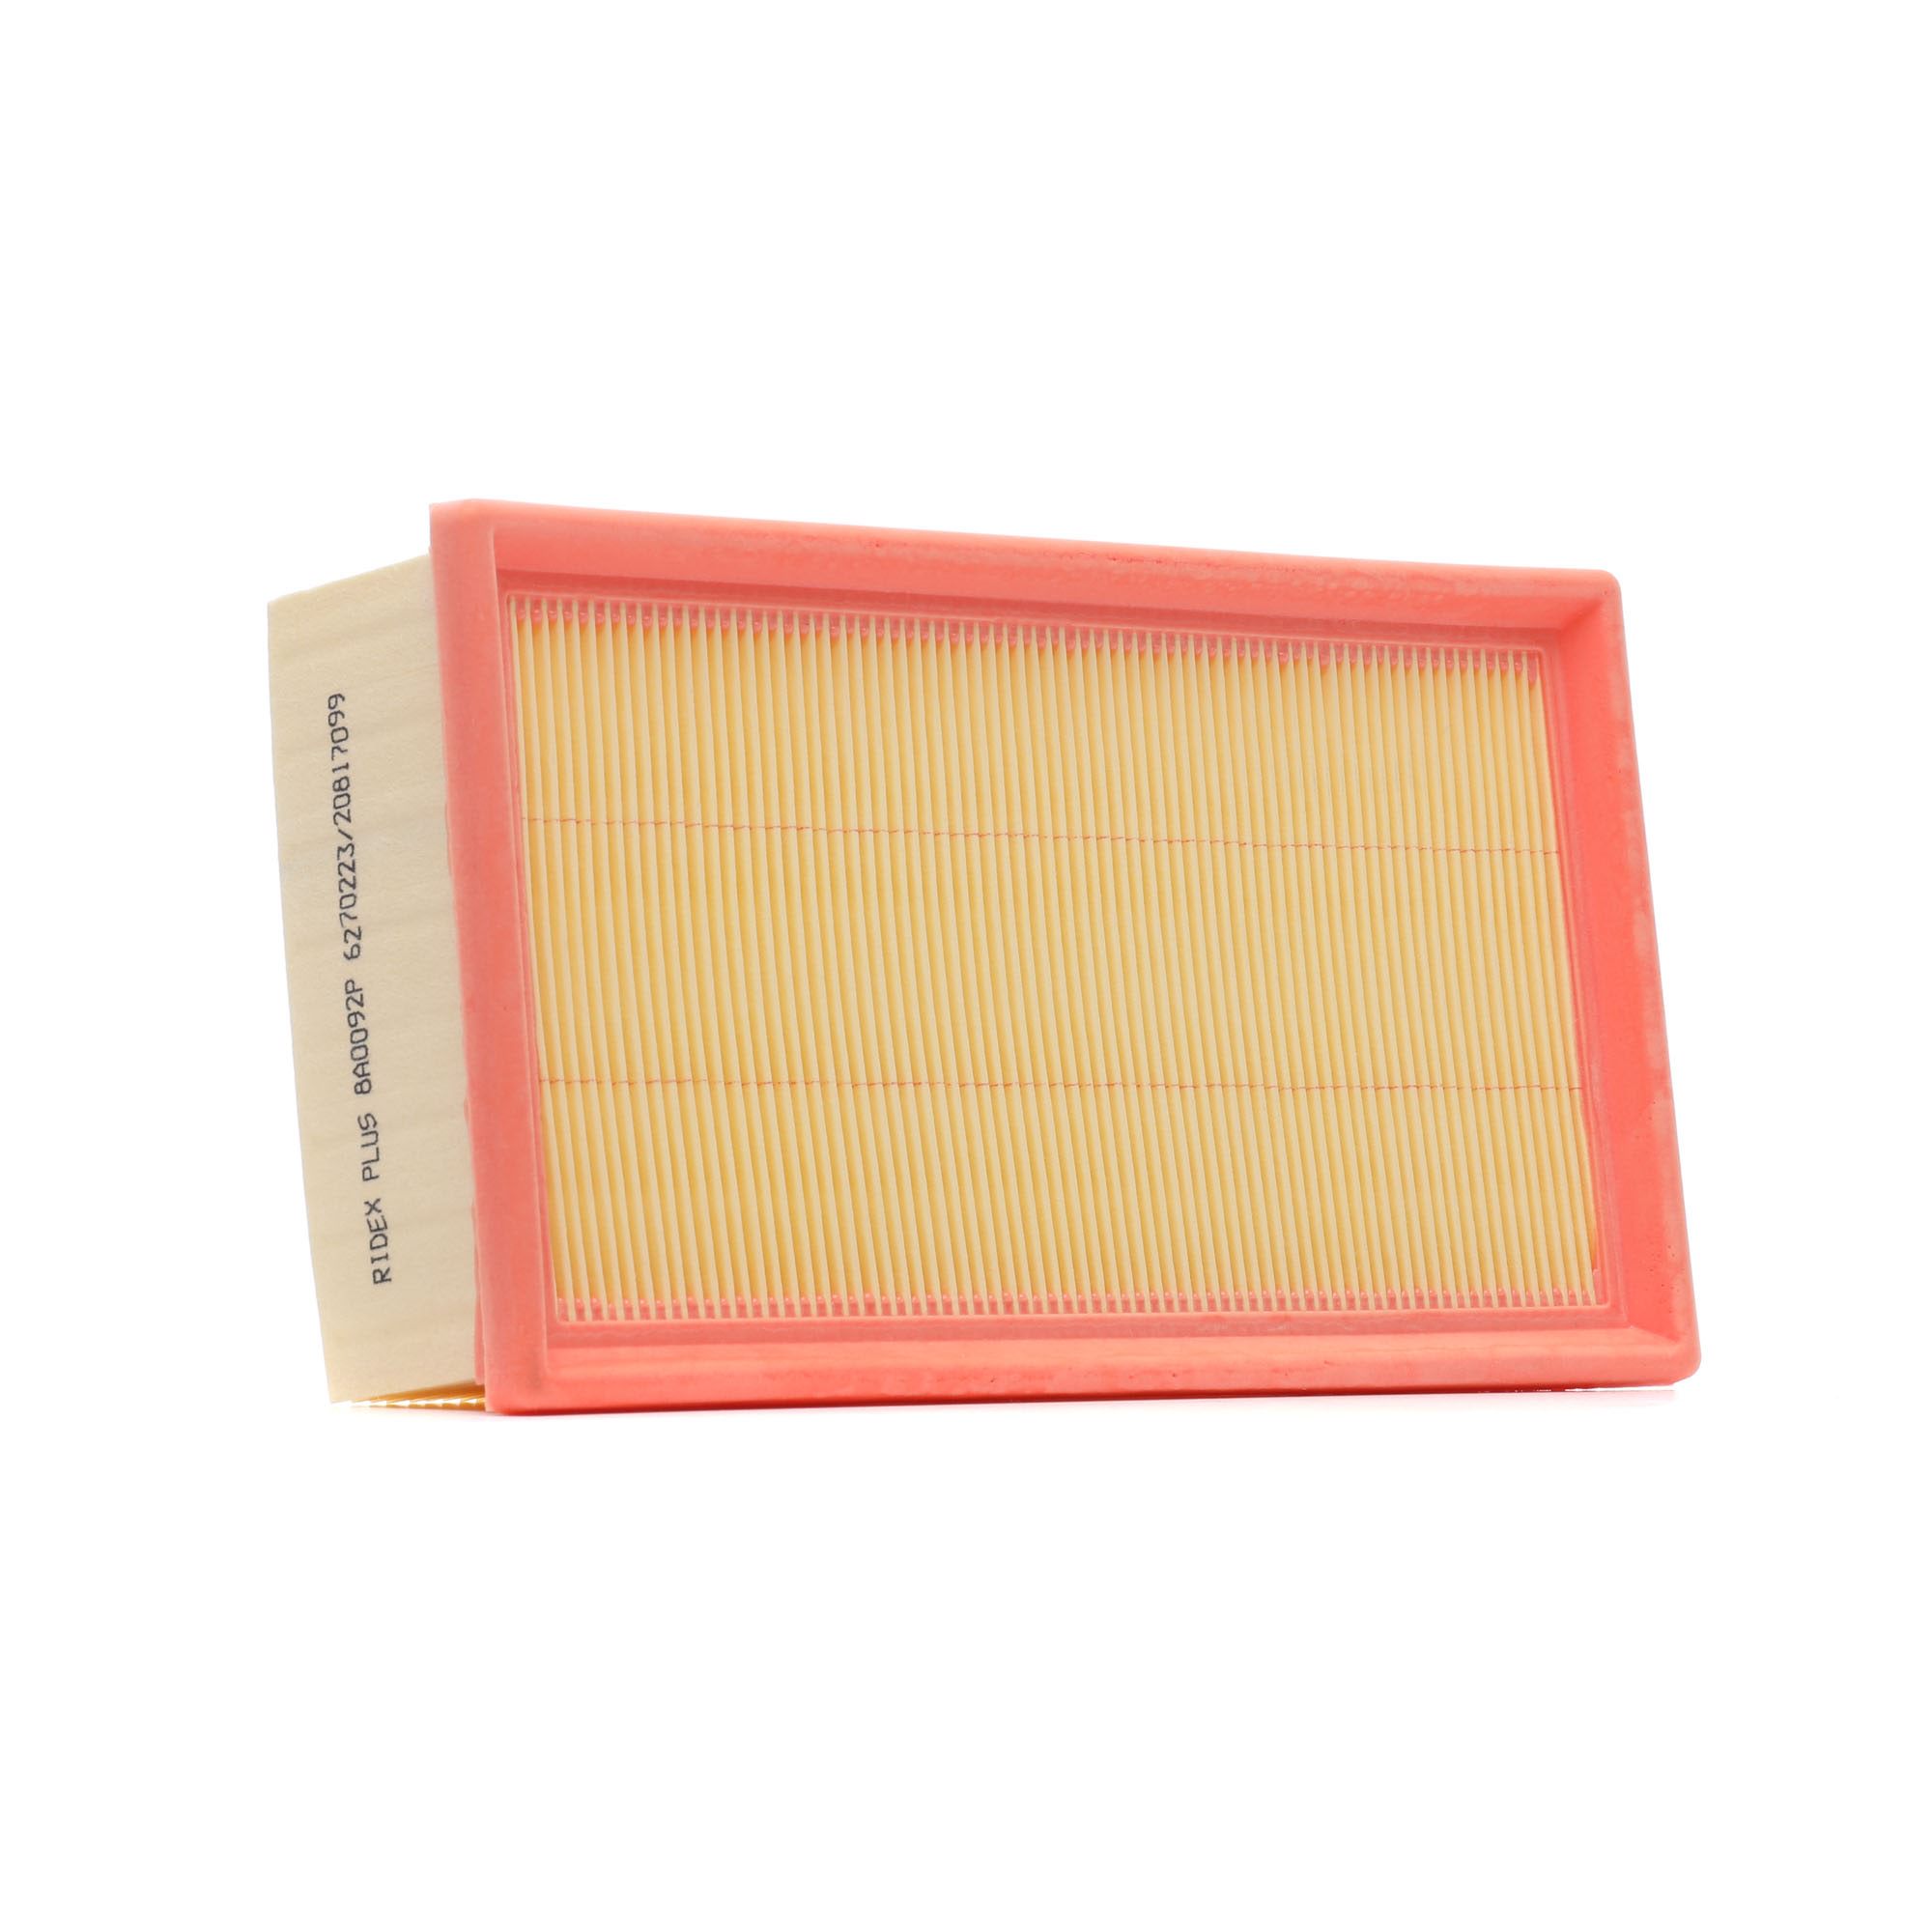 8A0092P RIDEX PLUS Air filters RENAULT 57mm, 140mm, 239mm, Filter Insert